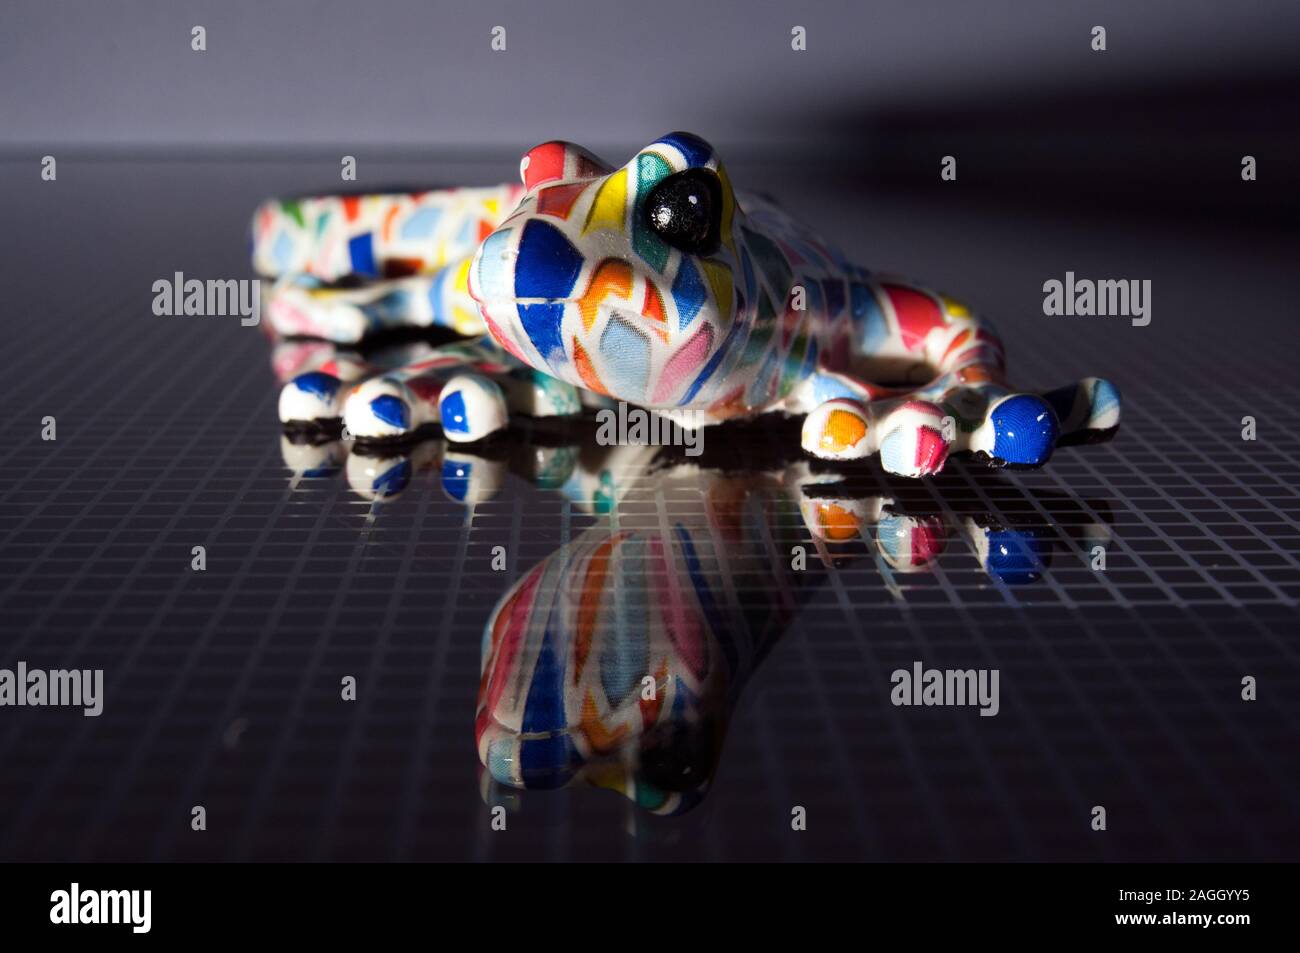 colorful designer lizard on a glass table. Reflex textured glass table. Colourful ceramic model salamander. Stock Photo